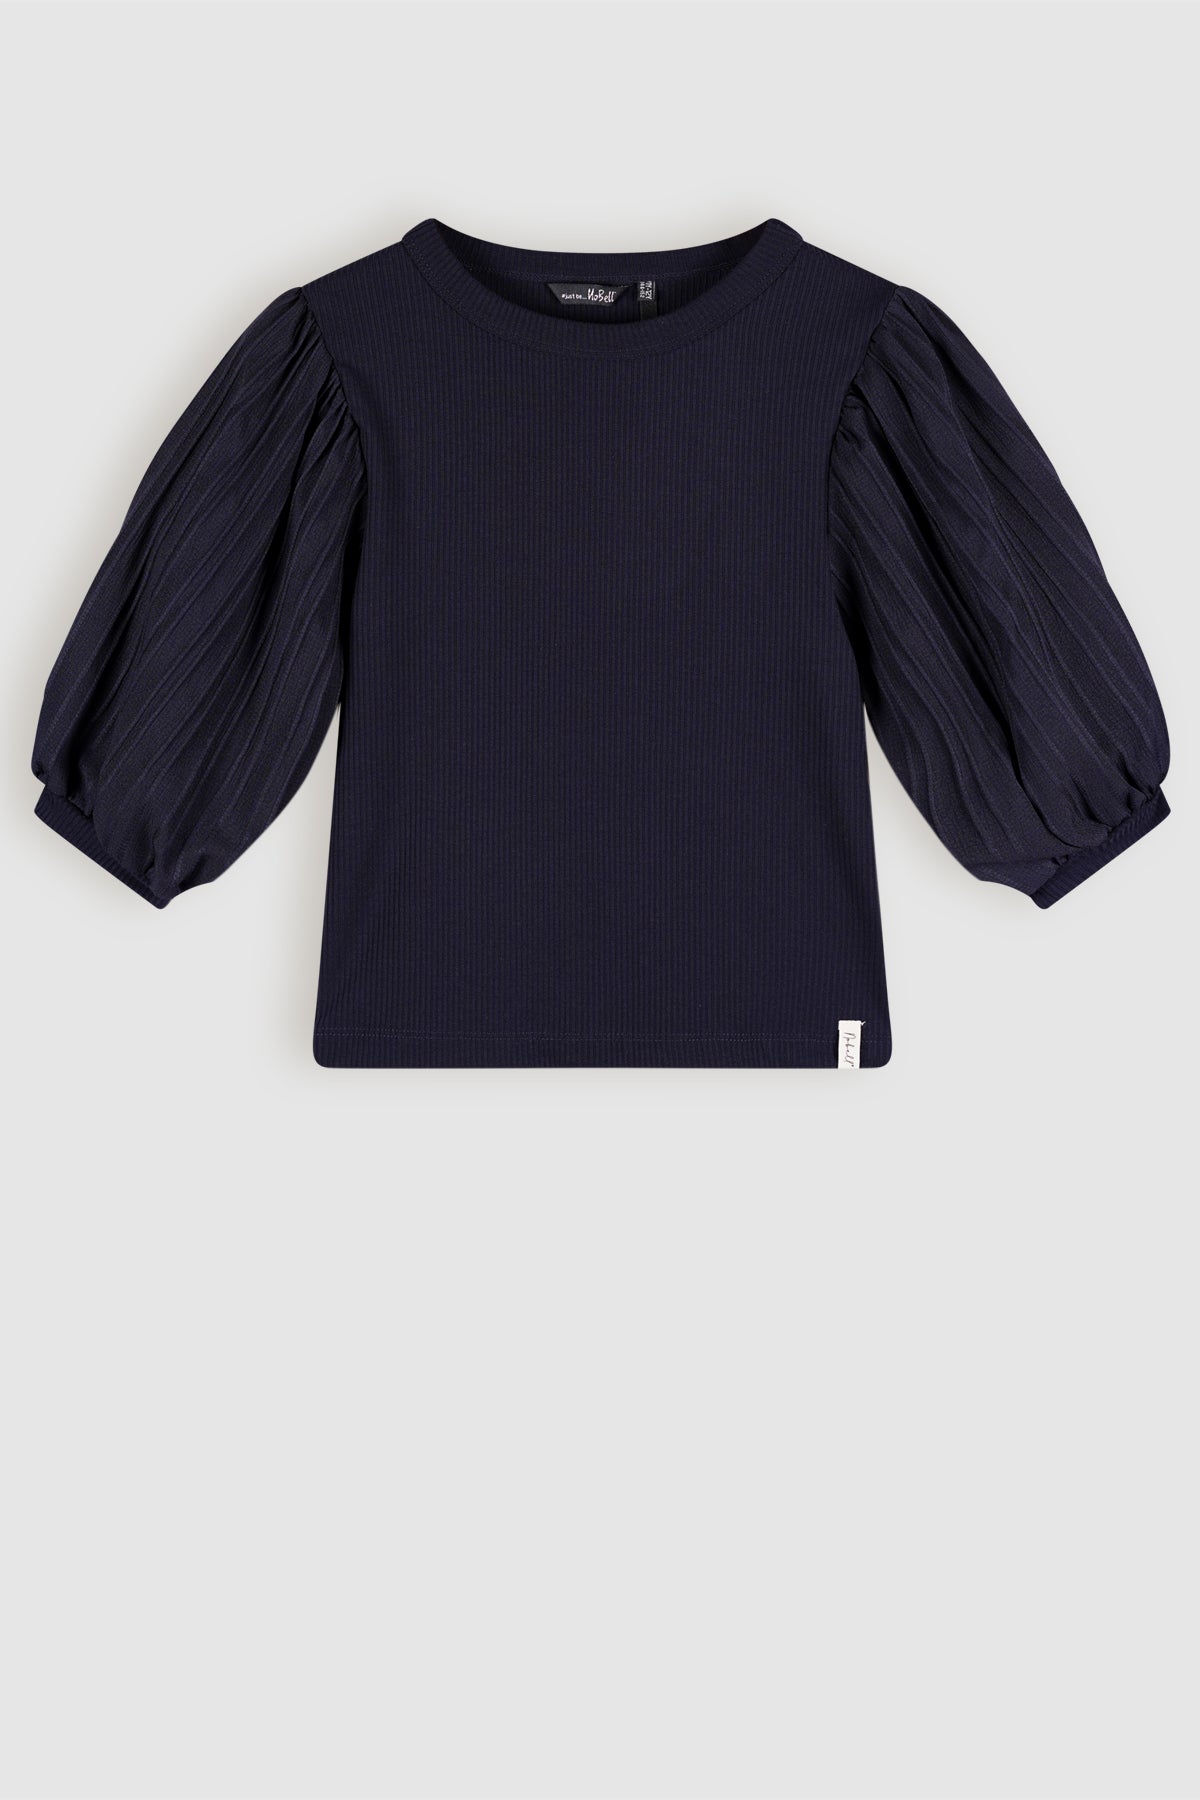 Kylia Cropped Top Navy